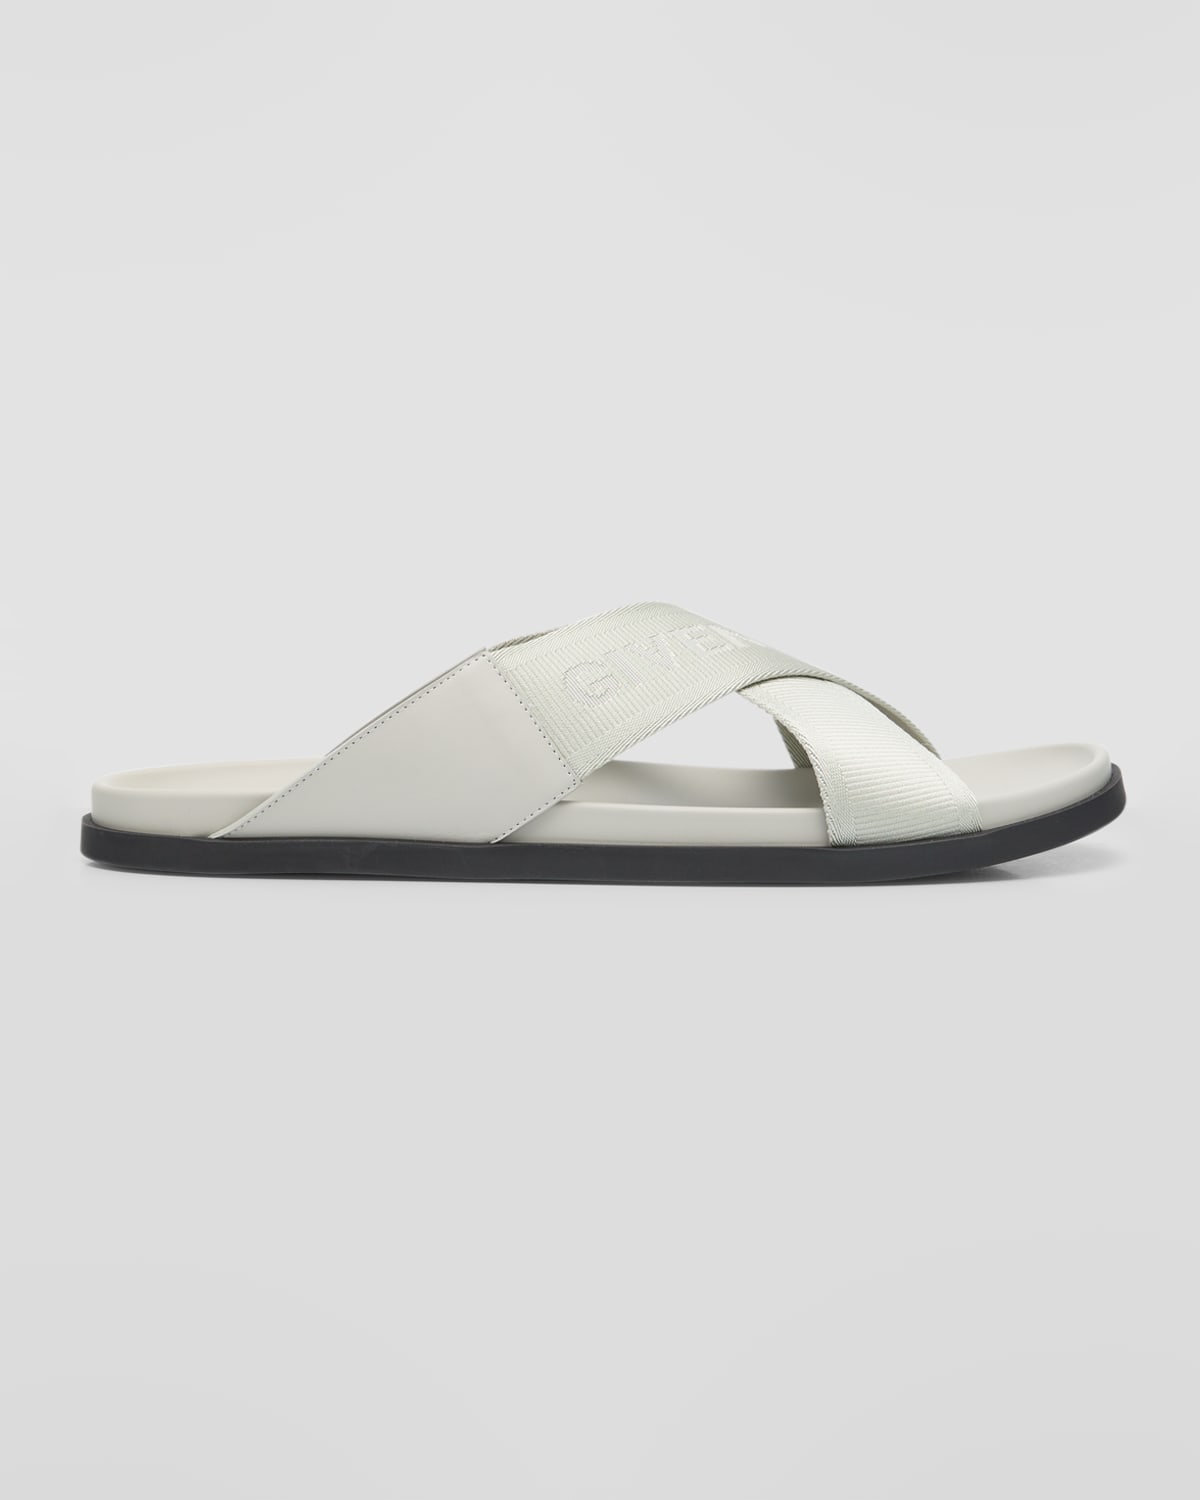 Givenchy Men's G Plage Flat Sandals With Crossed Straps In Webbing In Light Grey